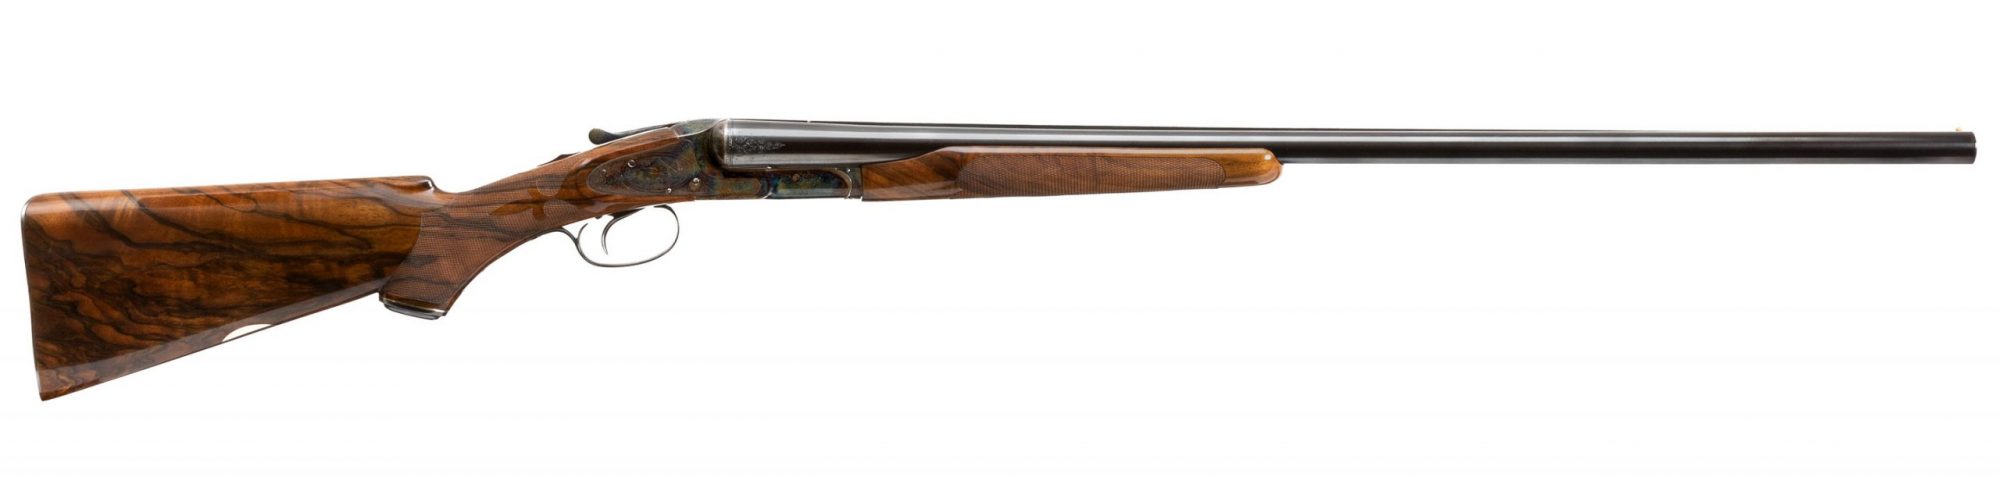 Photo of a pre-owned L.C. Smith 5E 12 gauge double, for sale as-is by Turnbull Restoration of Bloomfield, NY